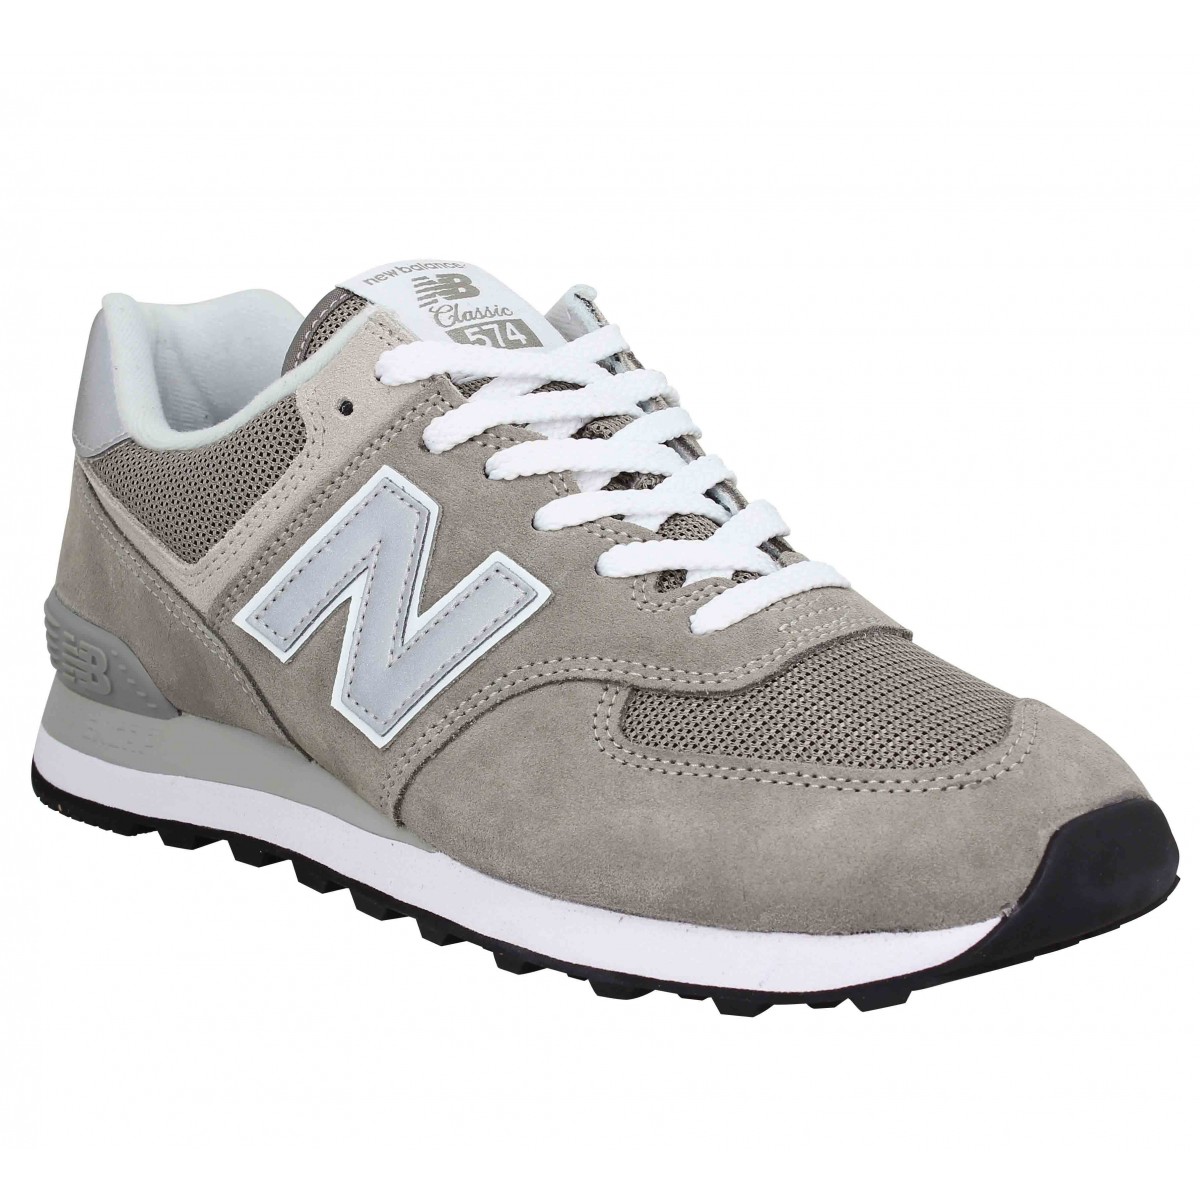 new balance 574 homme grise